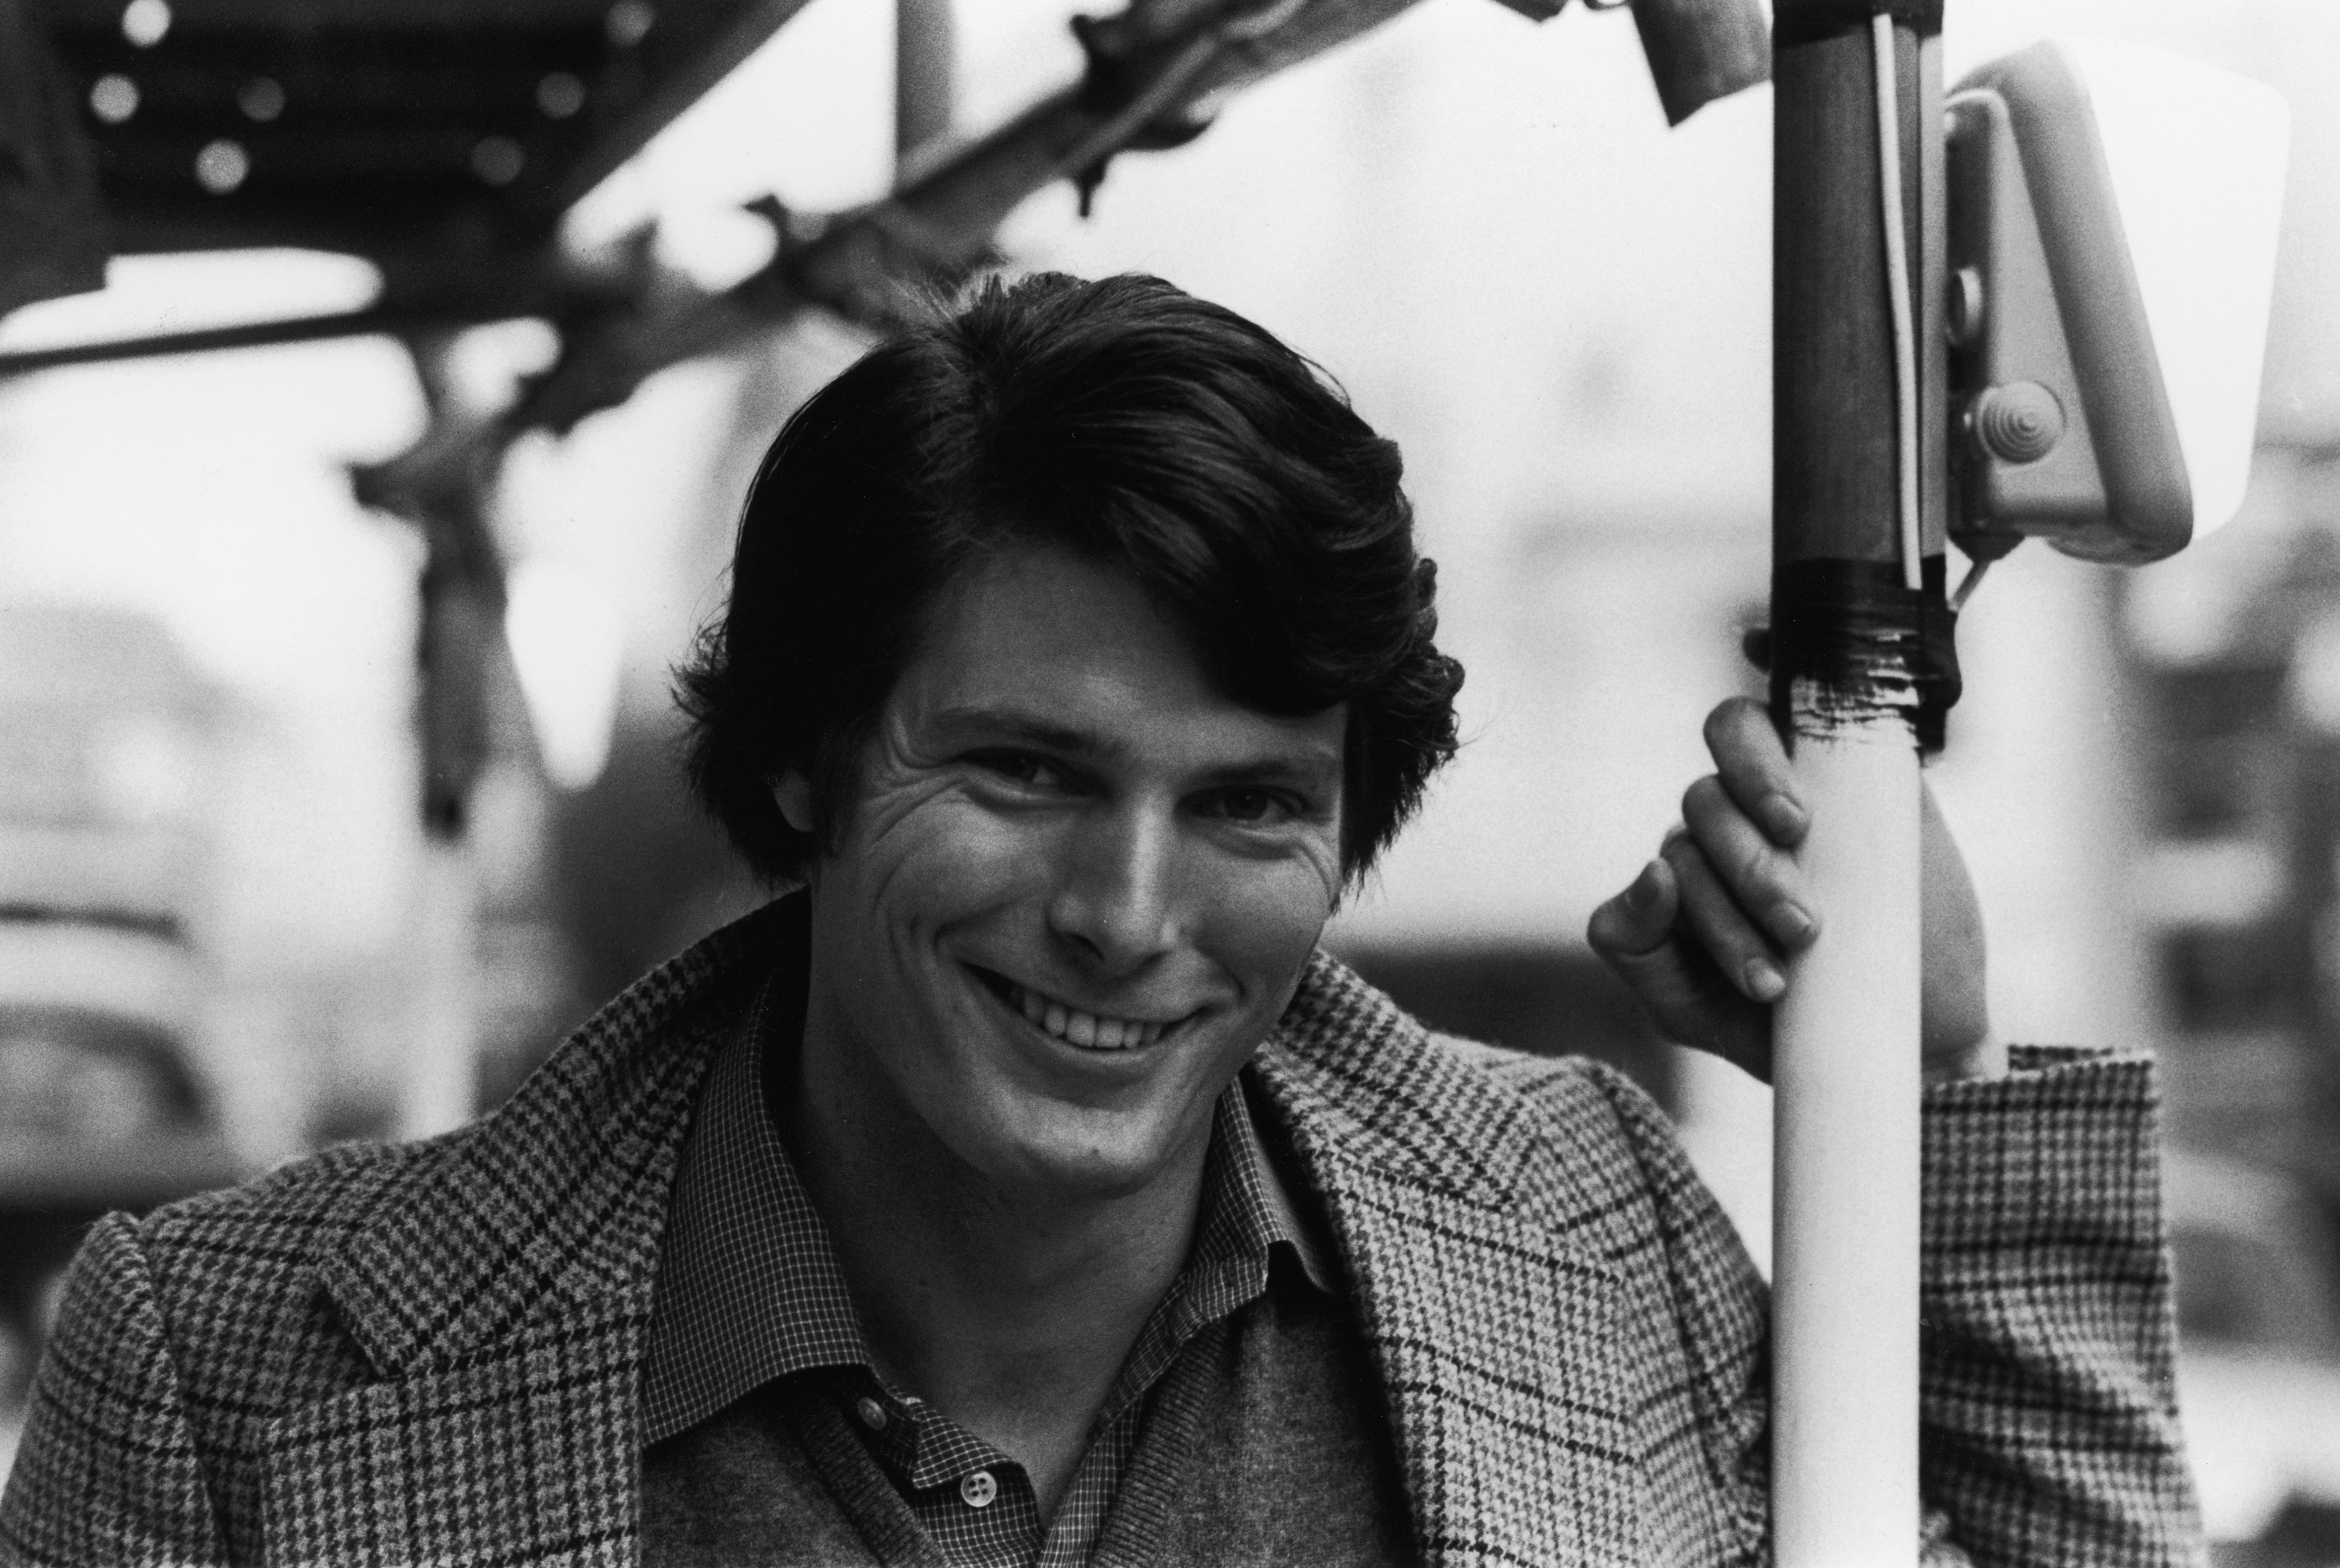 Christopher Reeve poses for a photo on December 1, 1978 | Photo: Getty Images